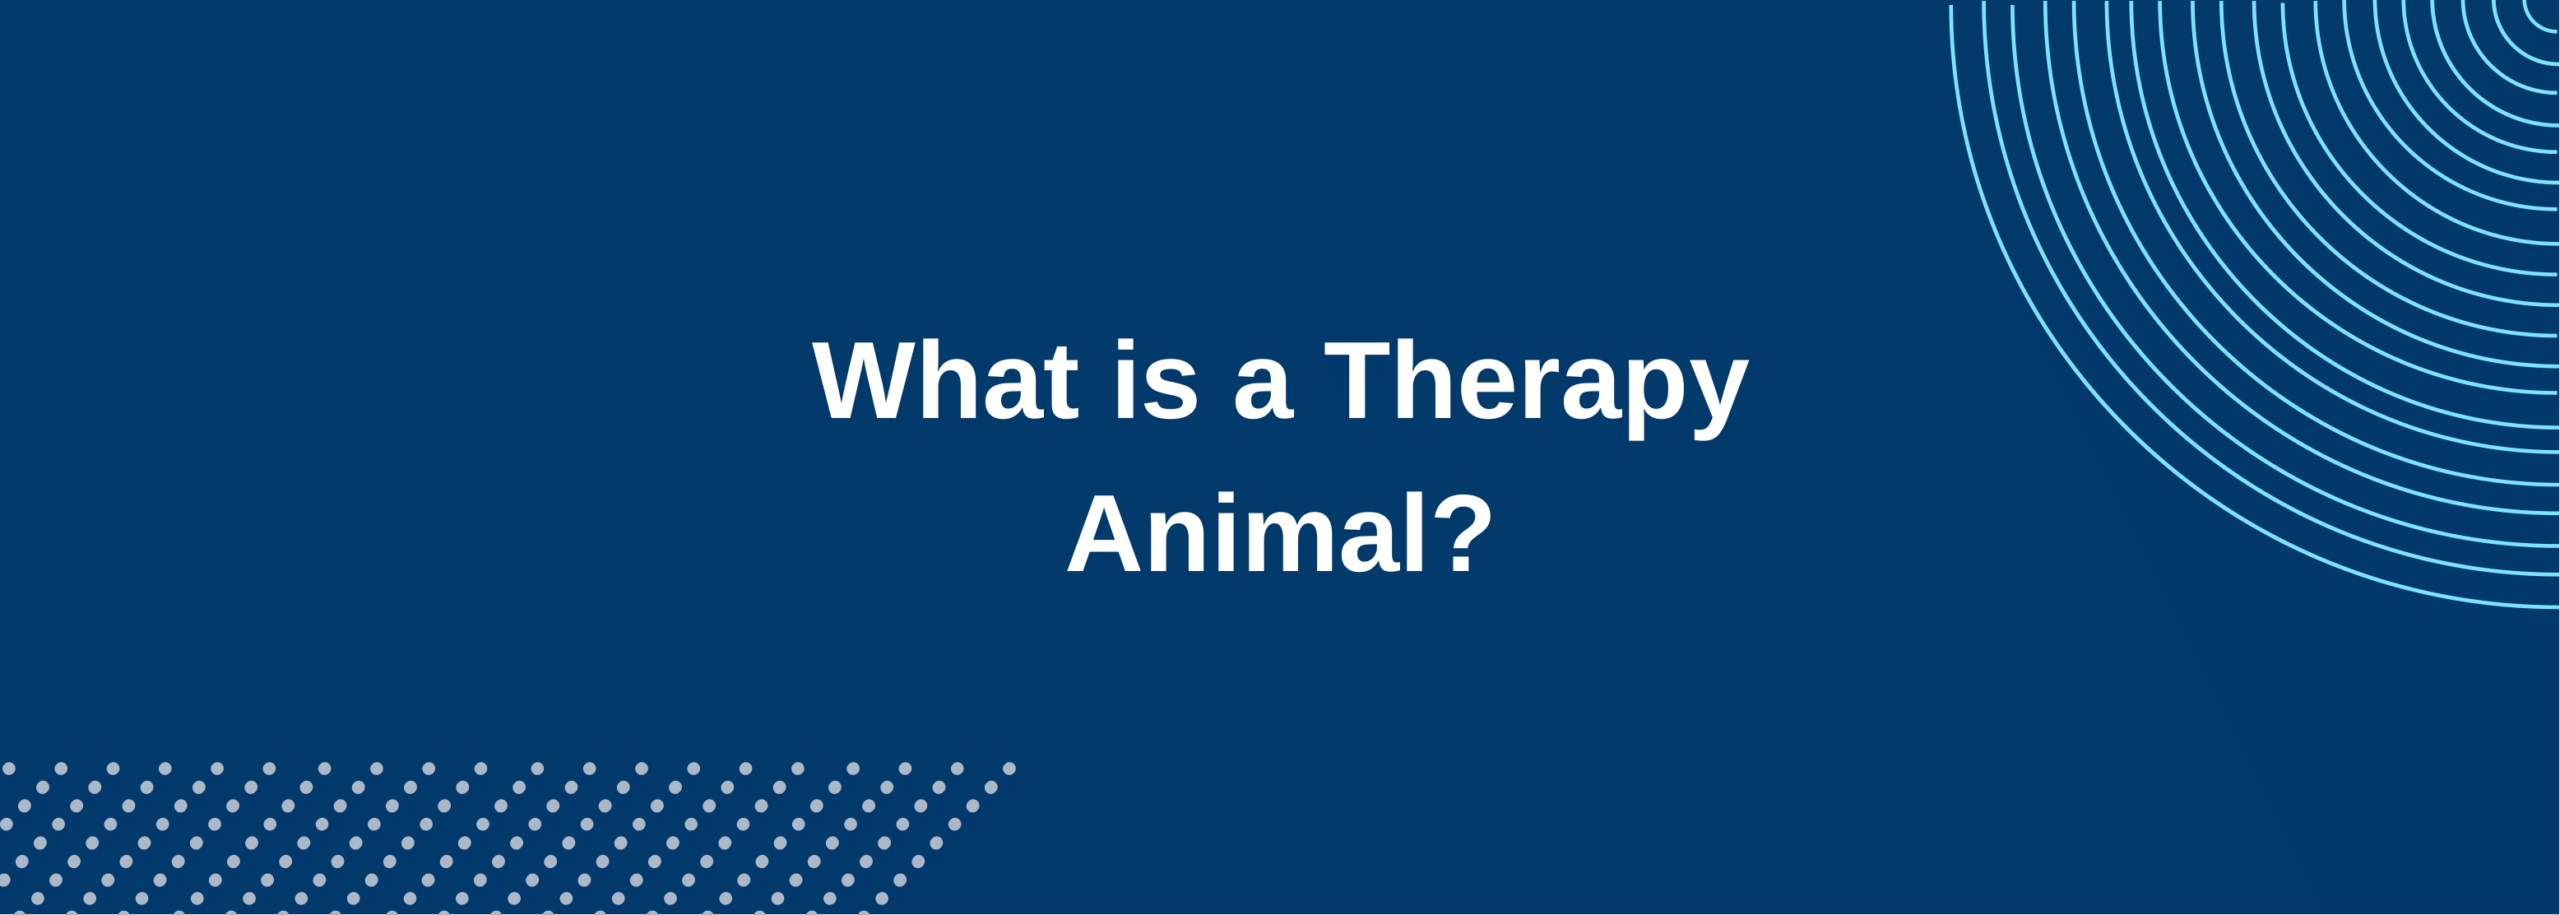 Therapy Animal